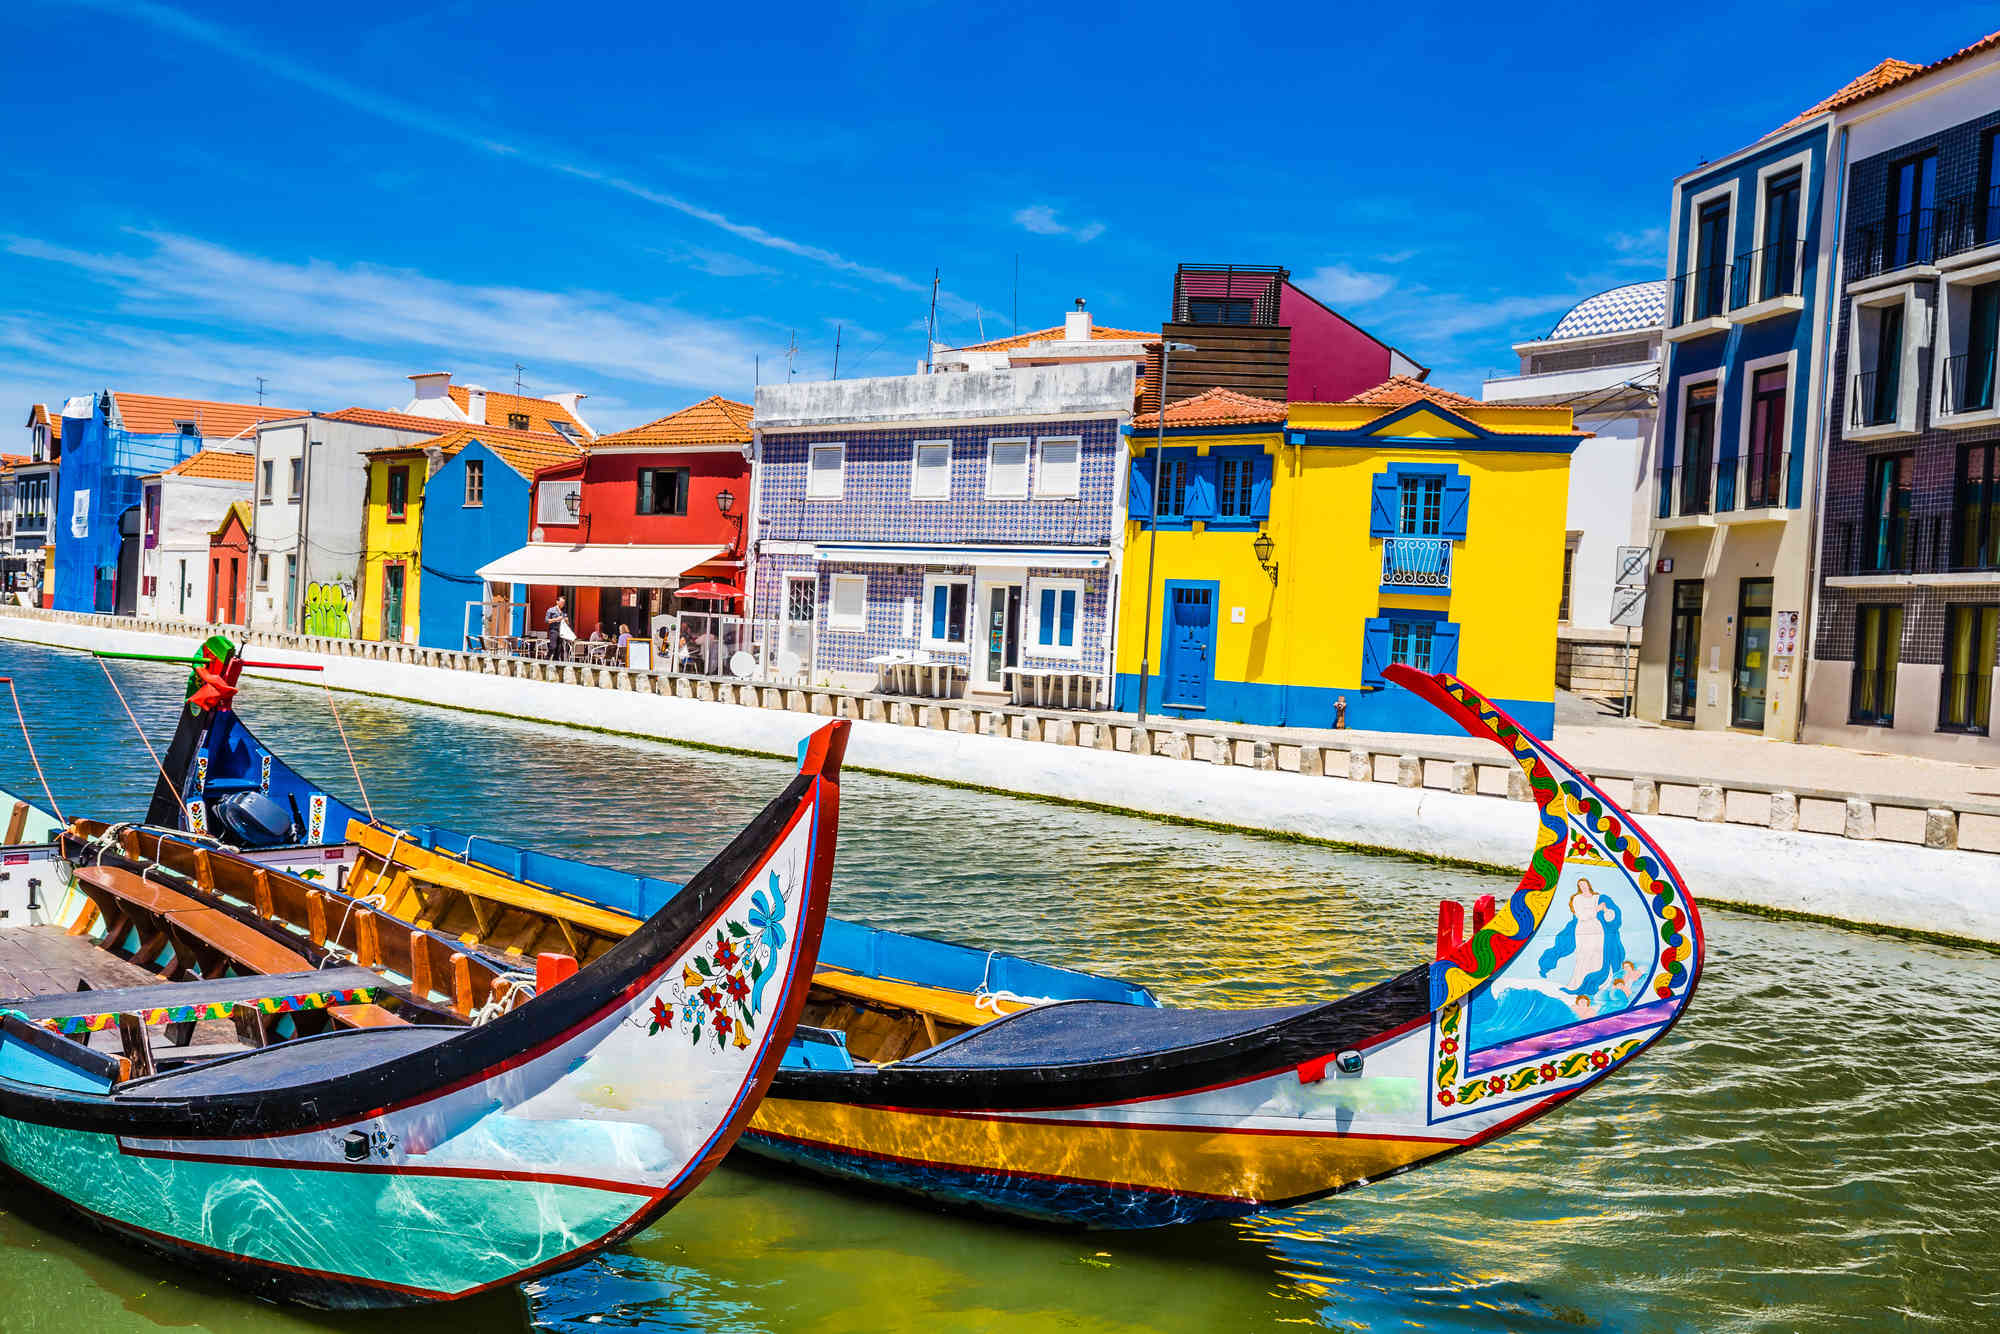 Marvel at colorful cities